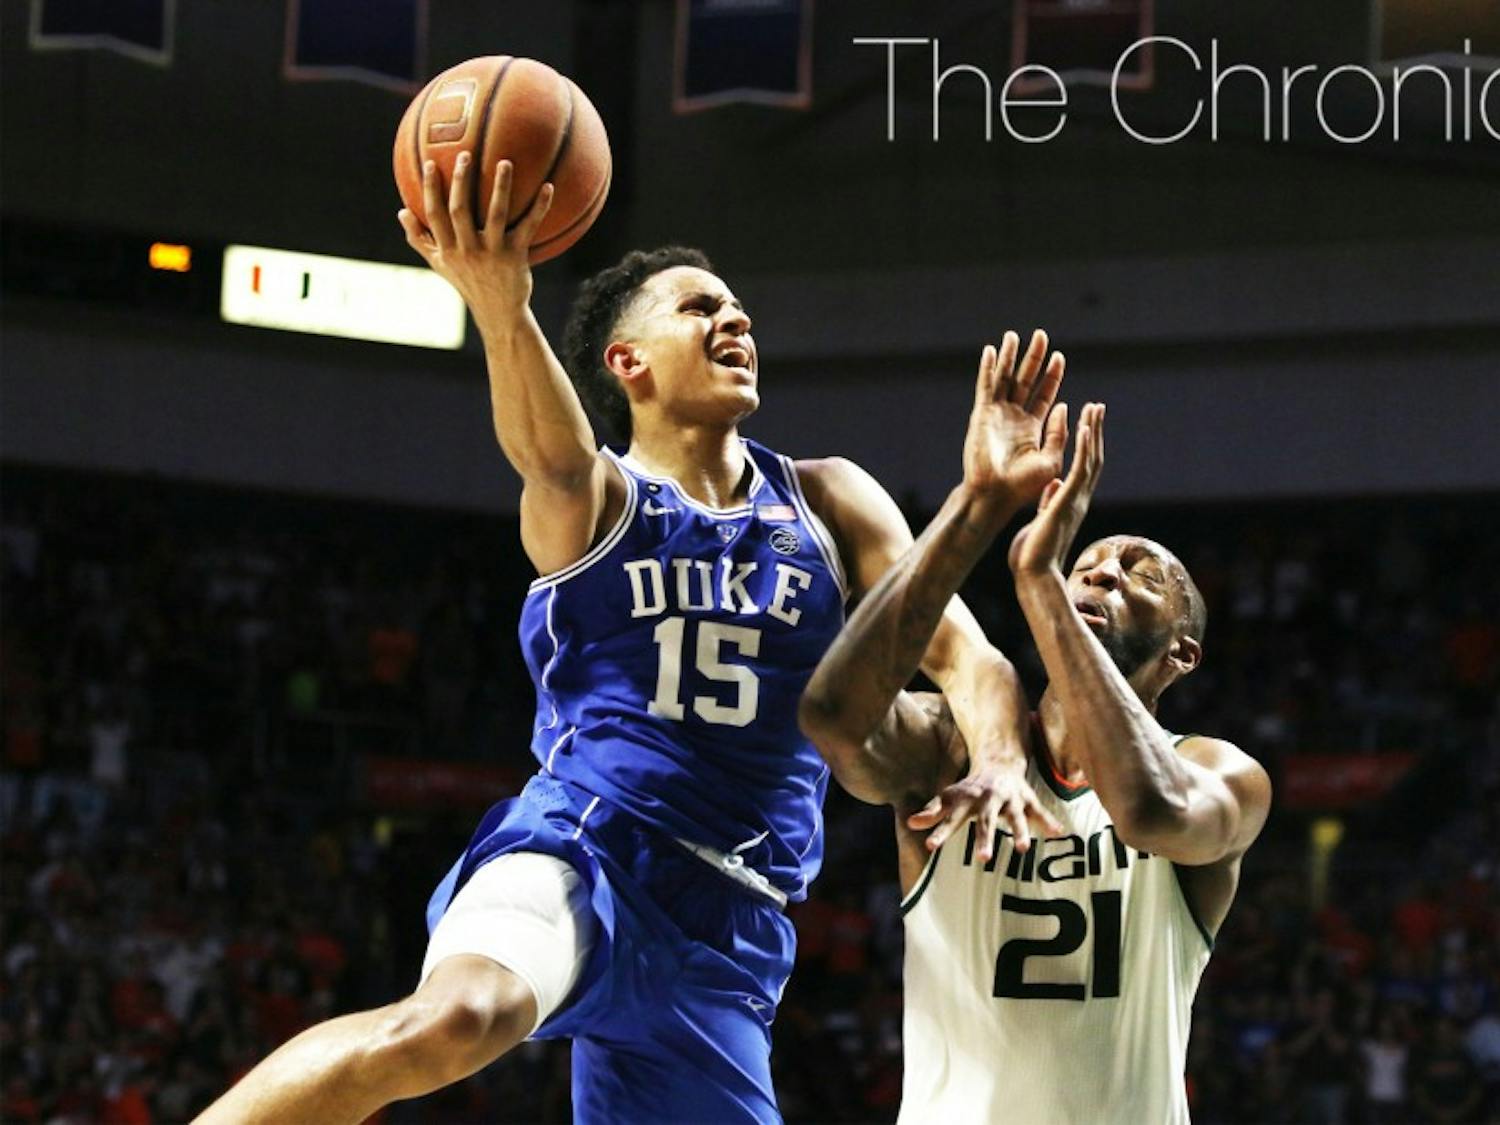 Frank Jackson will be Duke's 10th one-and-done since 2011.